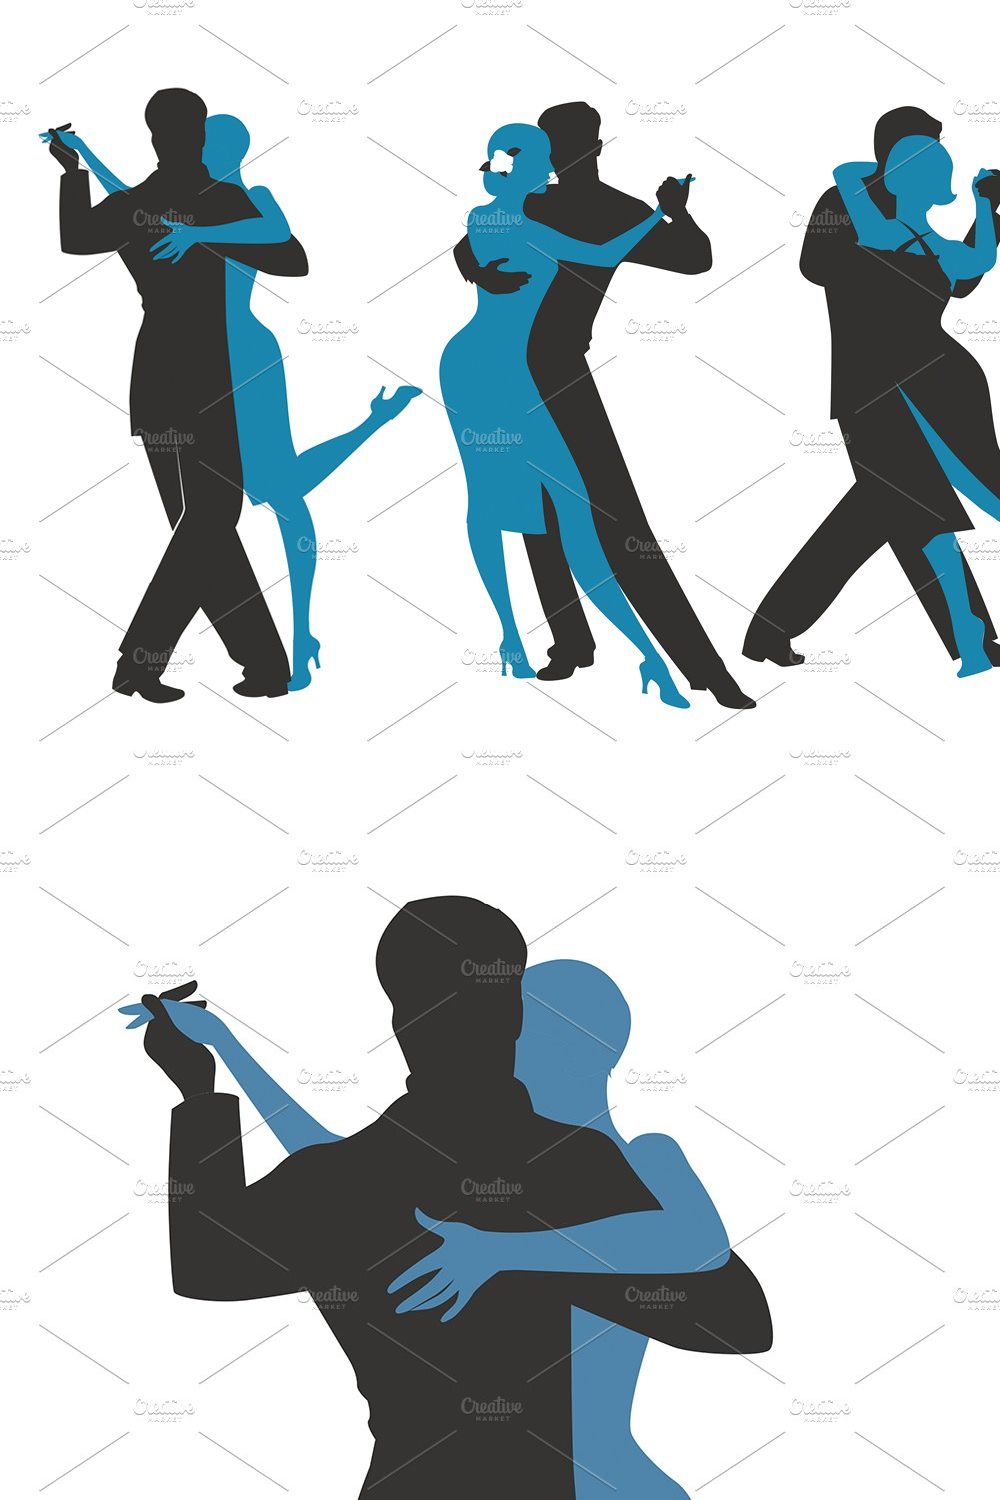 Three couples dancing tango pinterest preview image.